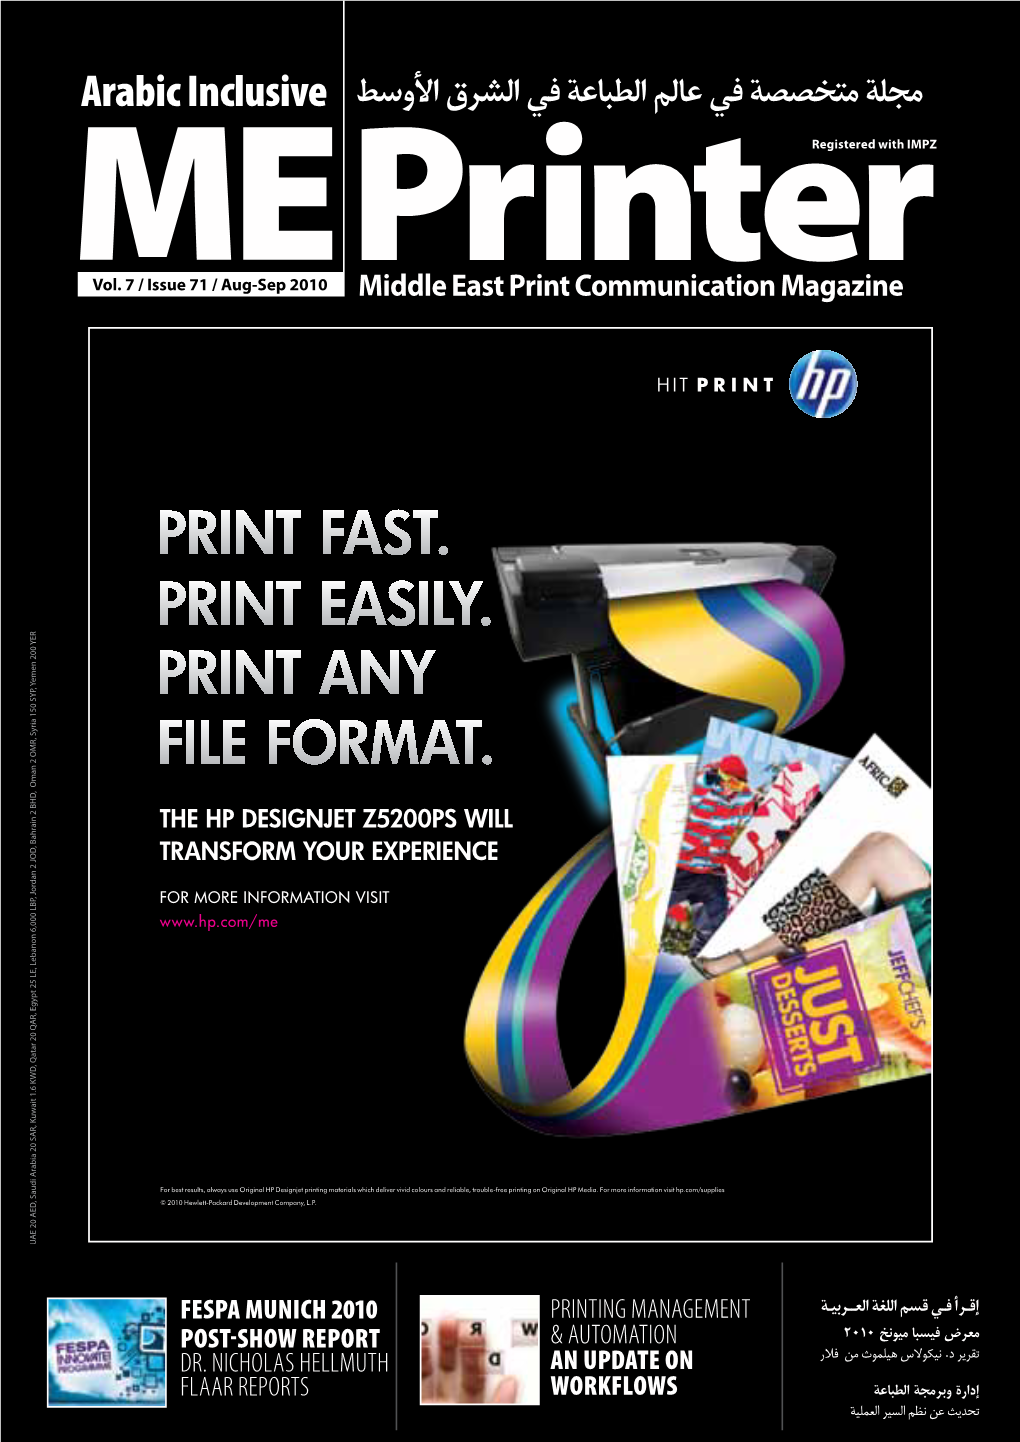 Print Fast. Print Any Print Easily. File Format